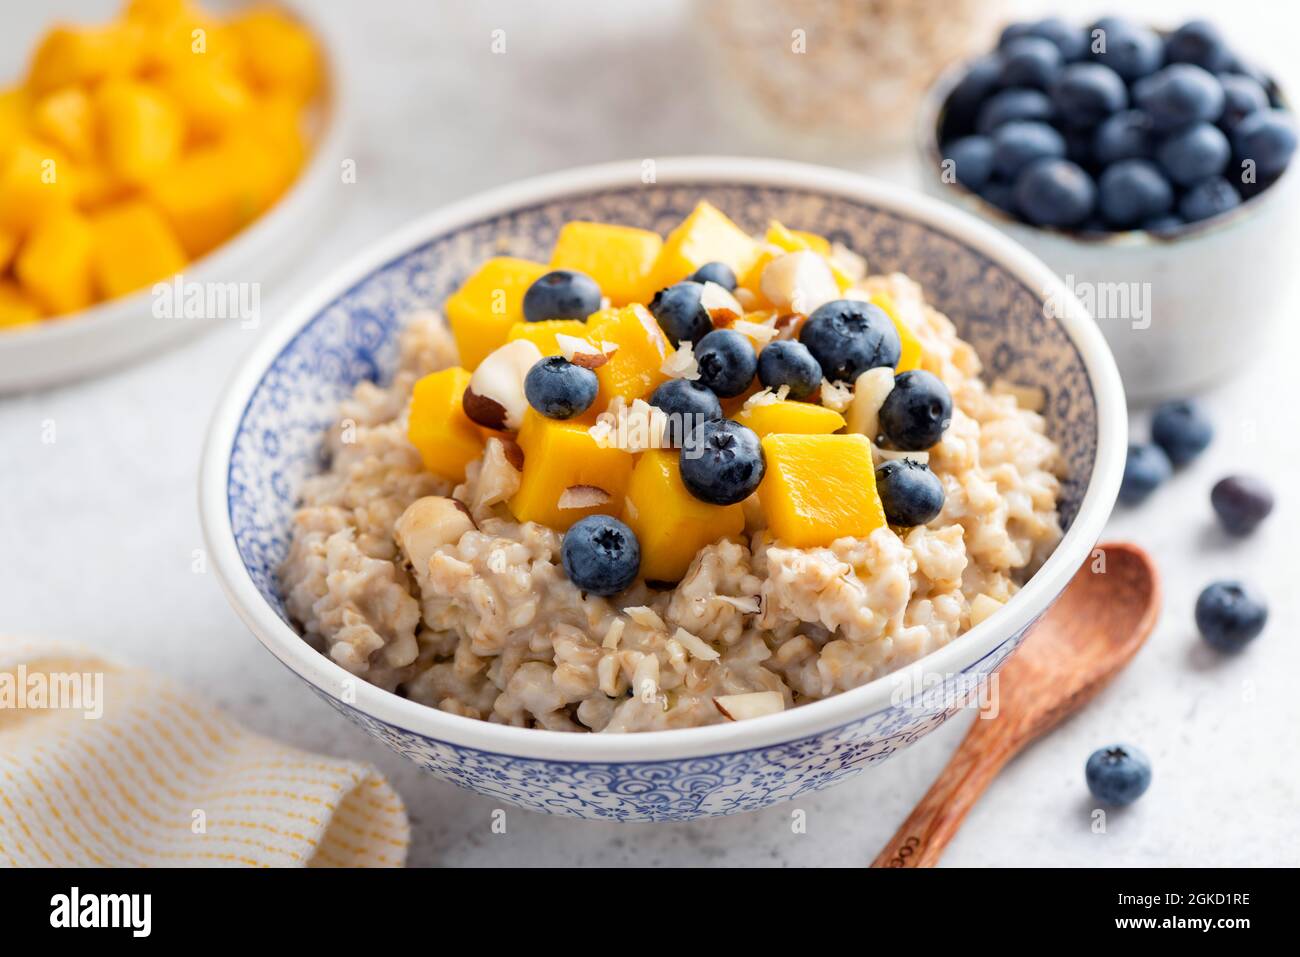 Oatmeal porridge with mango and blueberries in a bowl, closeup view. Weight loss, healthy diet breakfast food Stock Photo